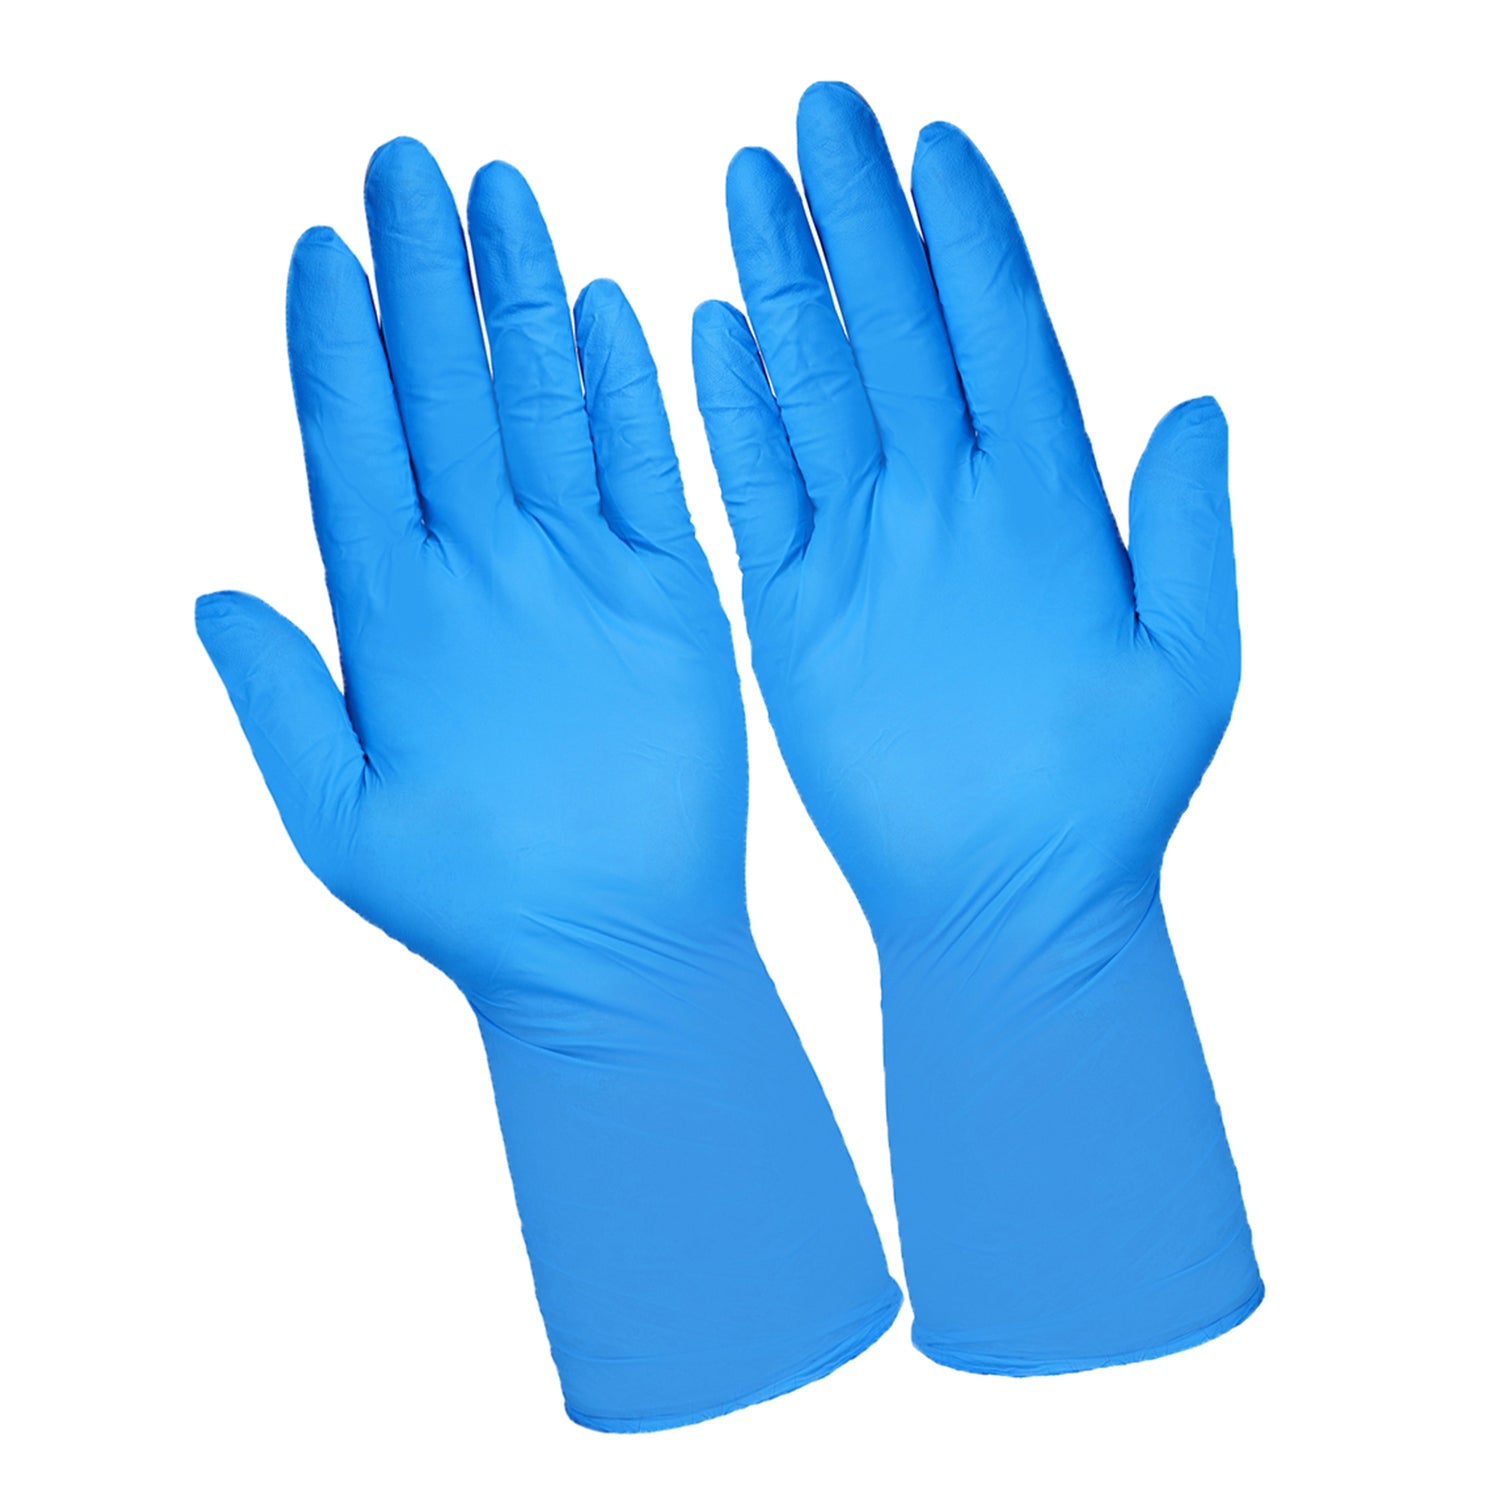 Premier AF Nitrile Examination Gloves | Sterile | Latex Free | XLarge | Pack of 50 Pairs | Short Expiry Date (1)